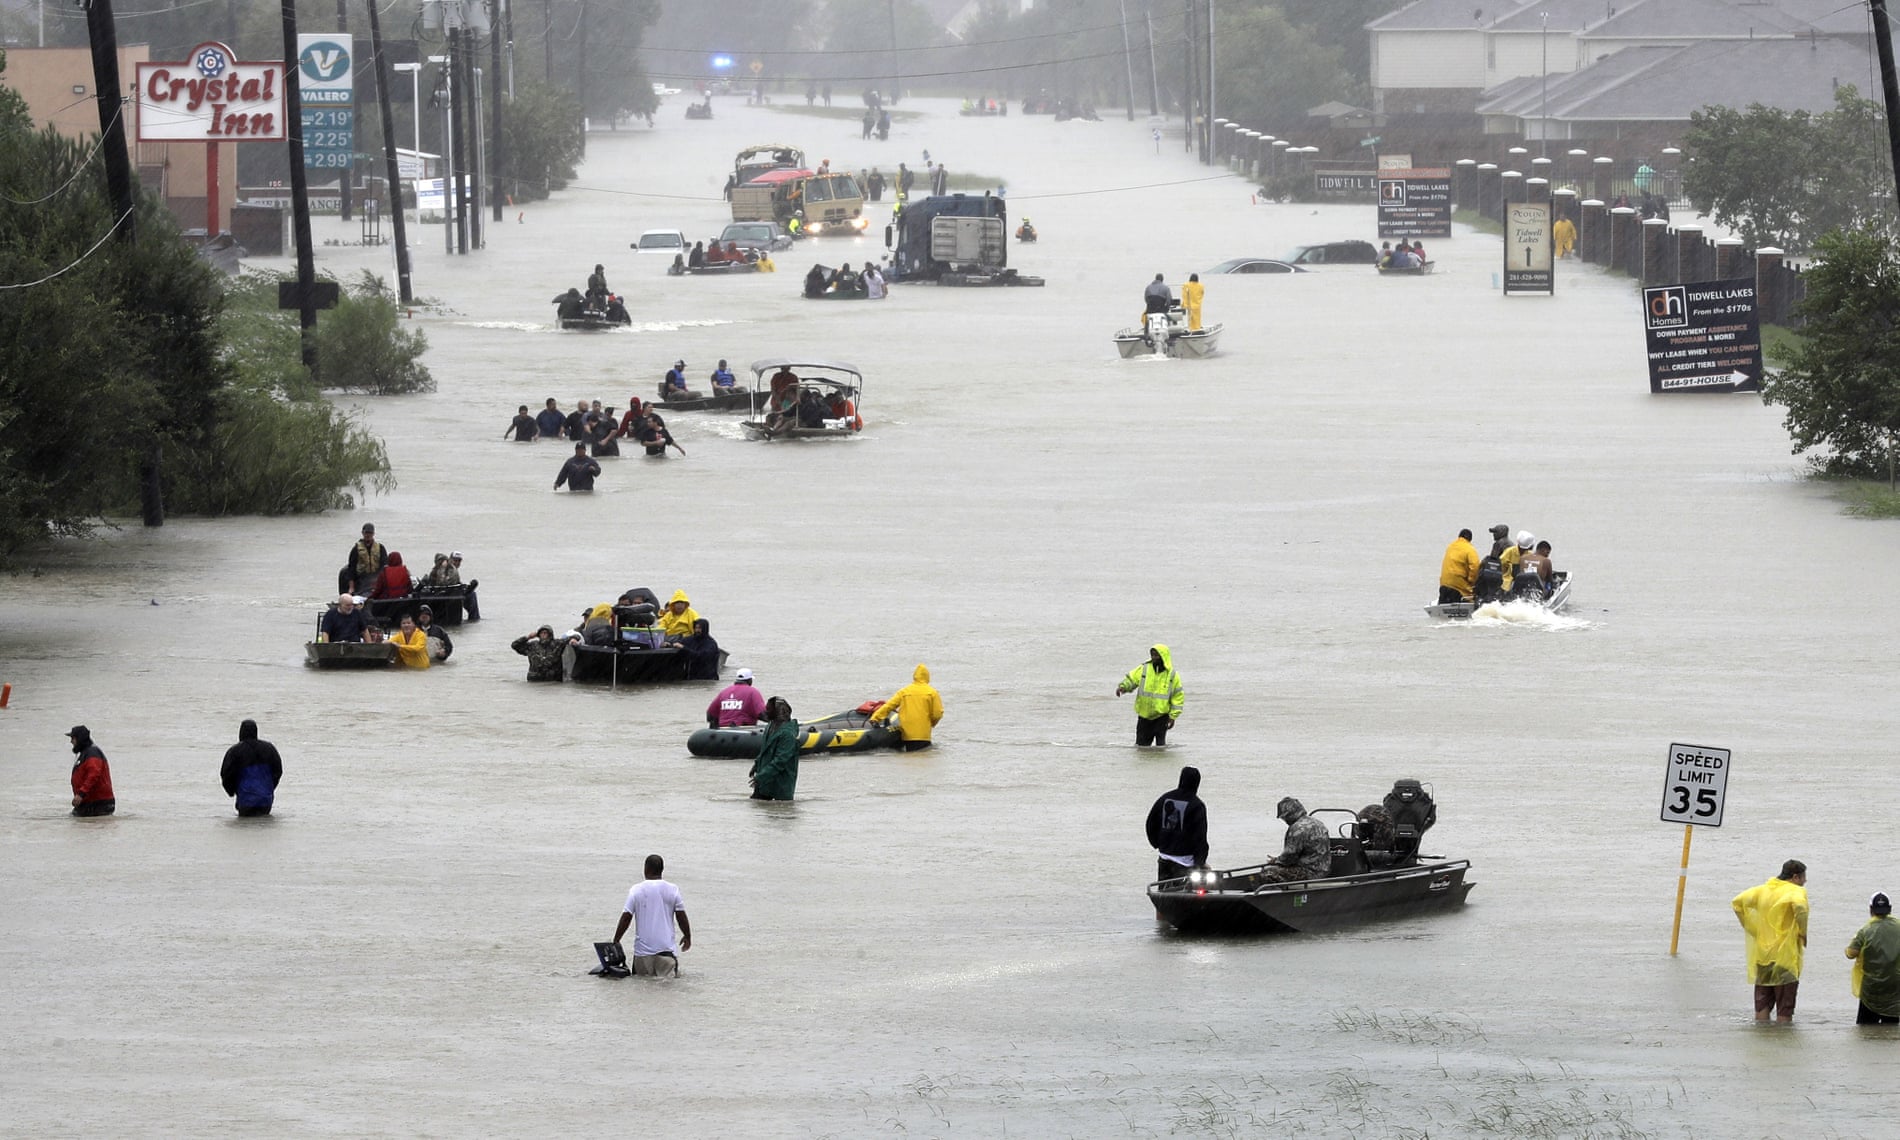 Rescue boats fill a flooded street in Houston as people are evacuated.